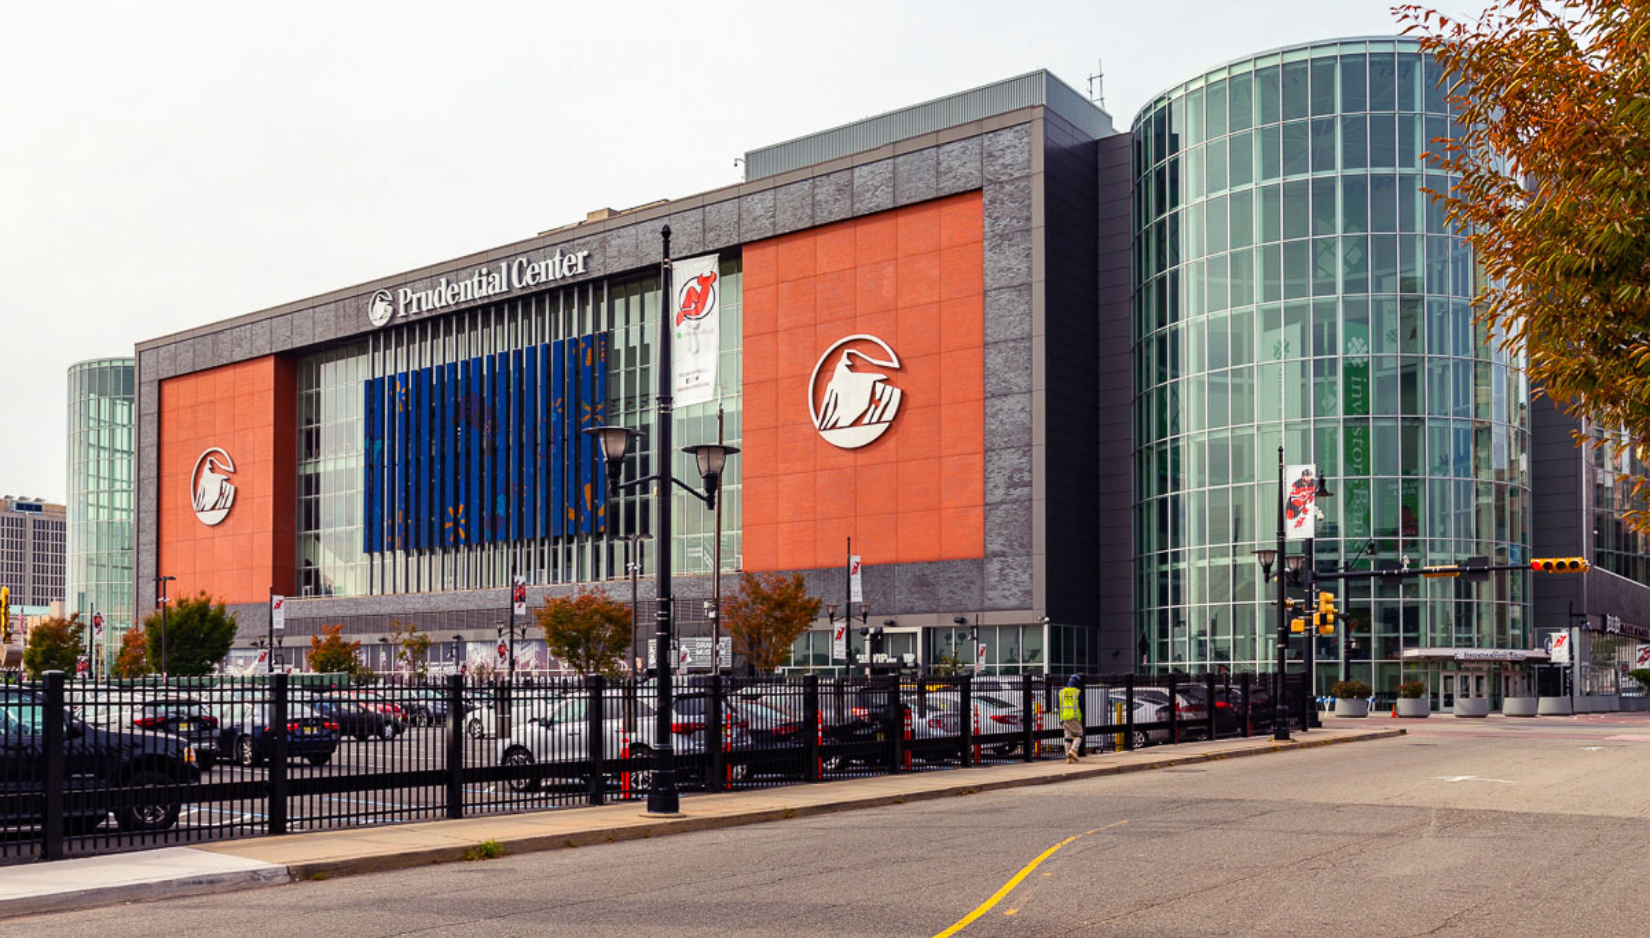 Exterior of Prudential Center and parking lot>
                            </div>

                        </div>
                        <div class=